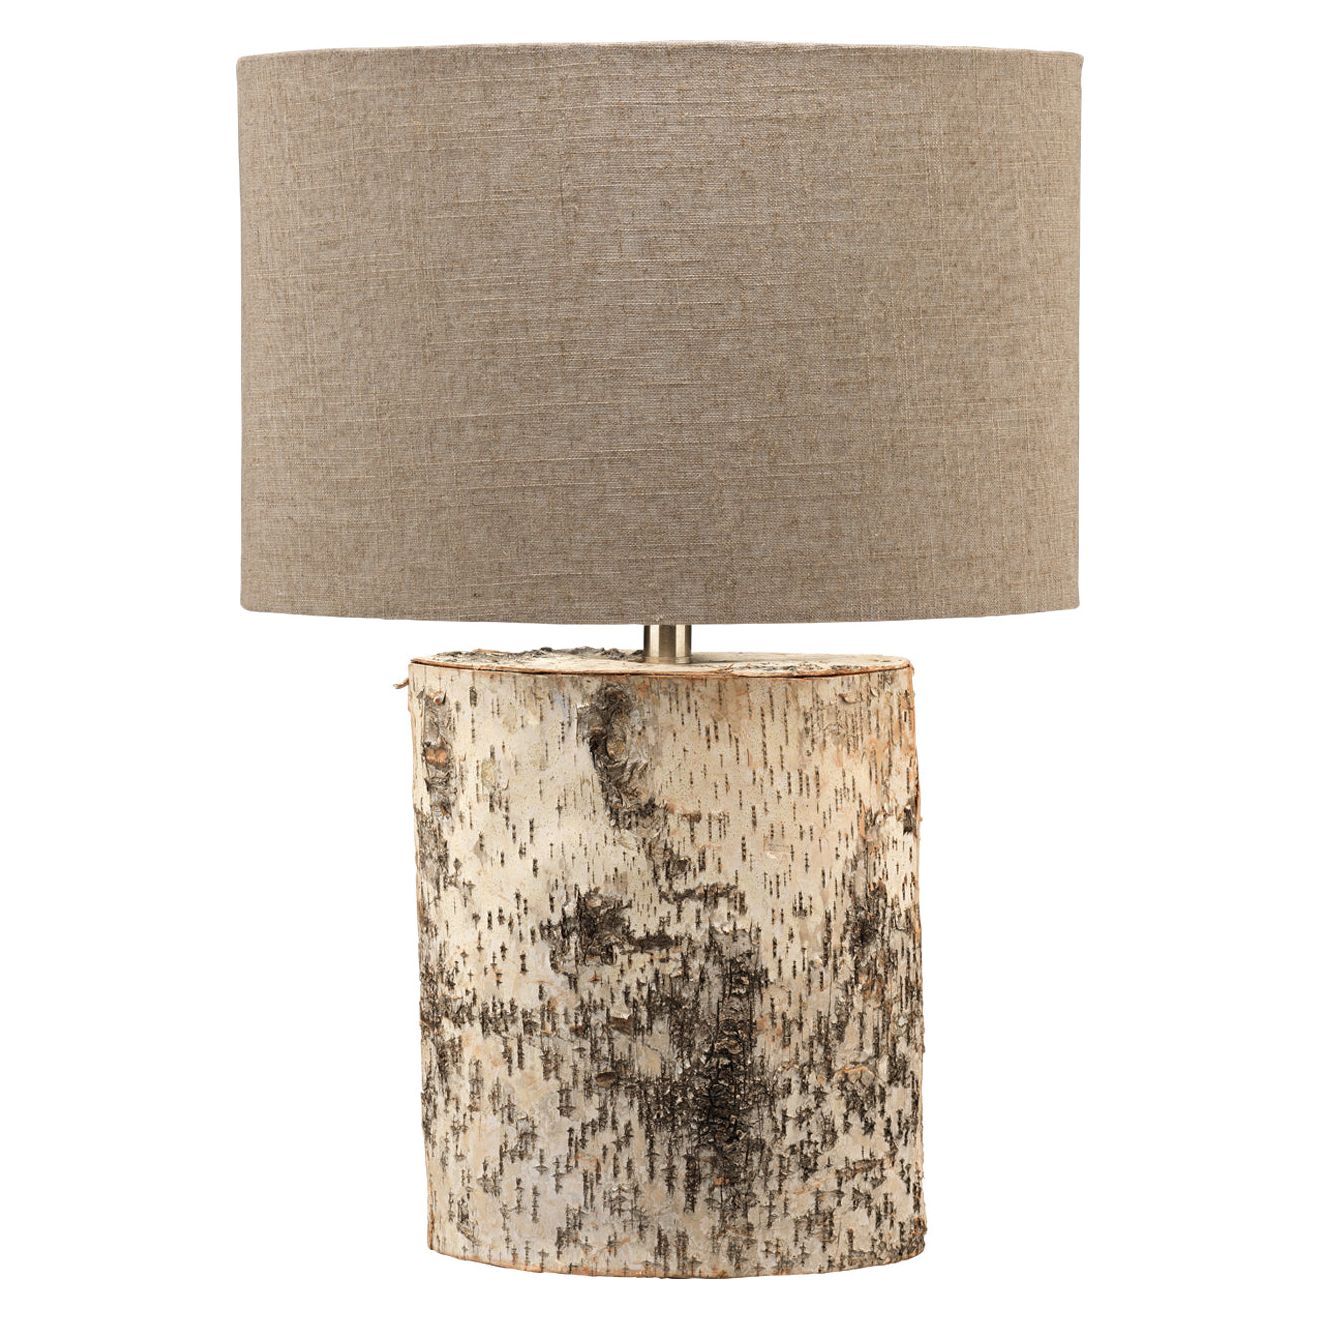 Jamie Young Company - 9FORRBIOV255 - Forrester Table Lamp - Forrester - Brown